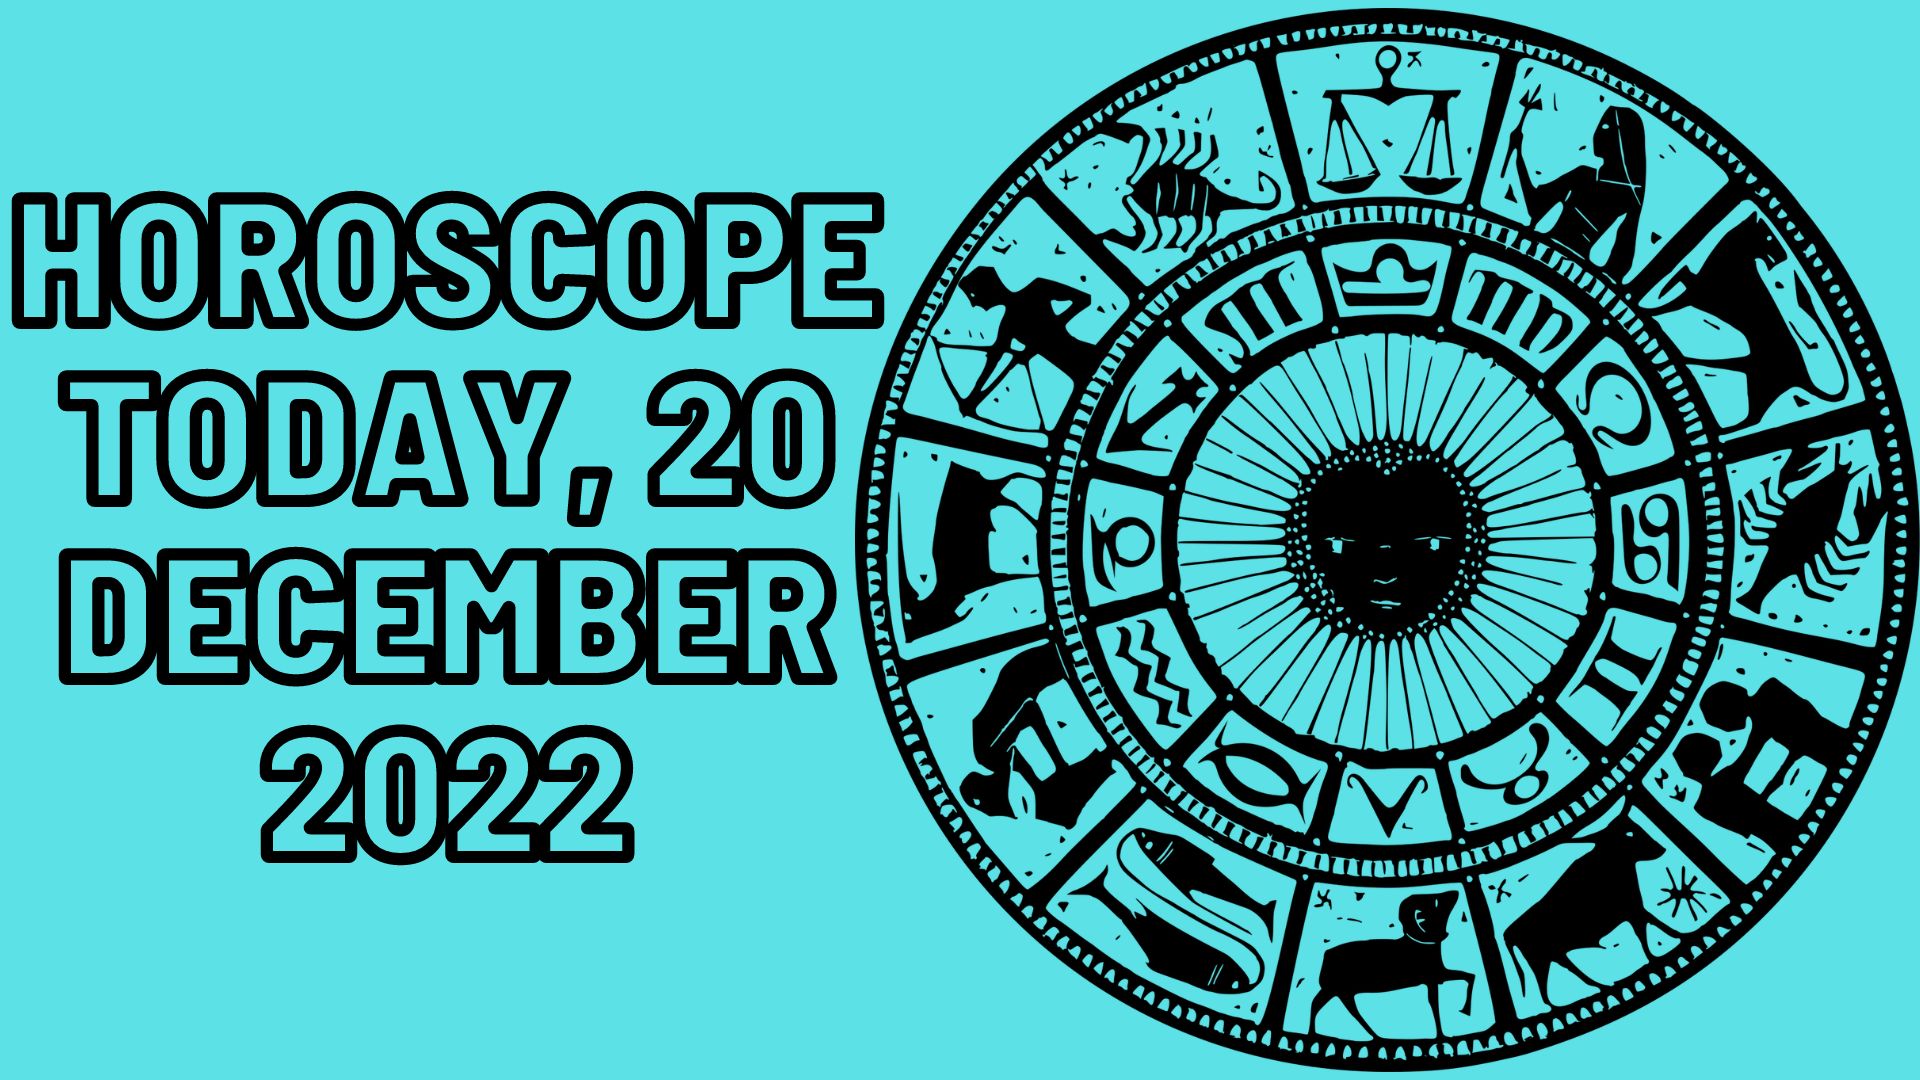 Horoscope Today, 20 December 2022 - Check Astrological Prediction Of Your Zodiac Sign